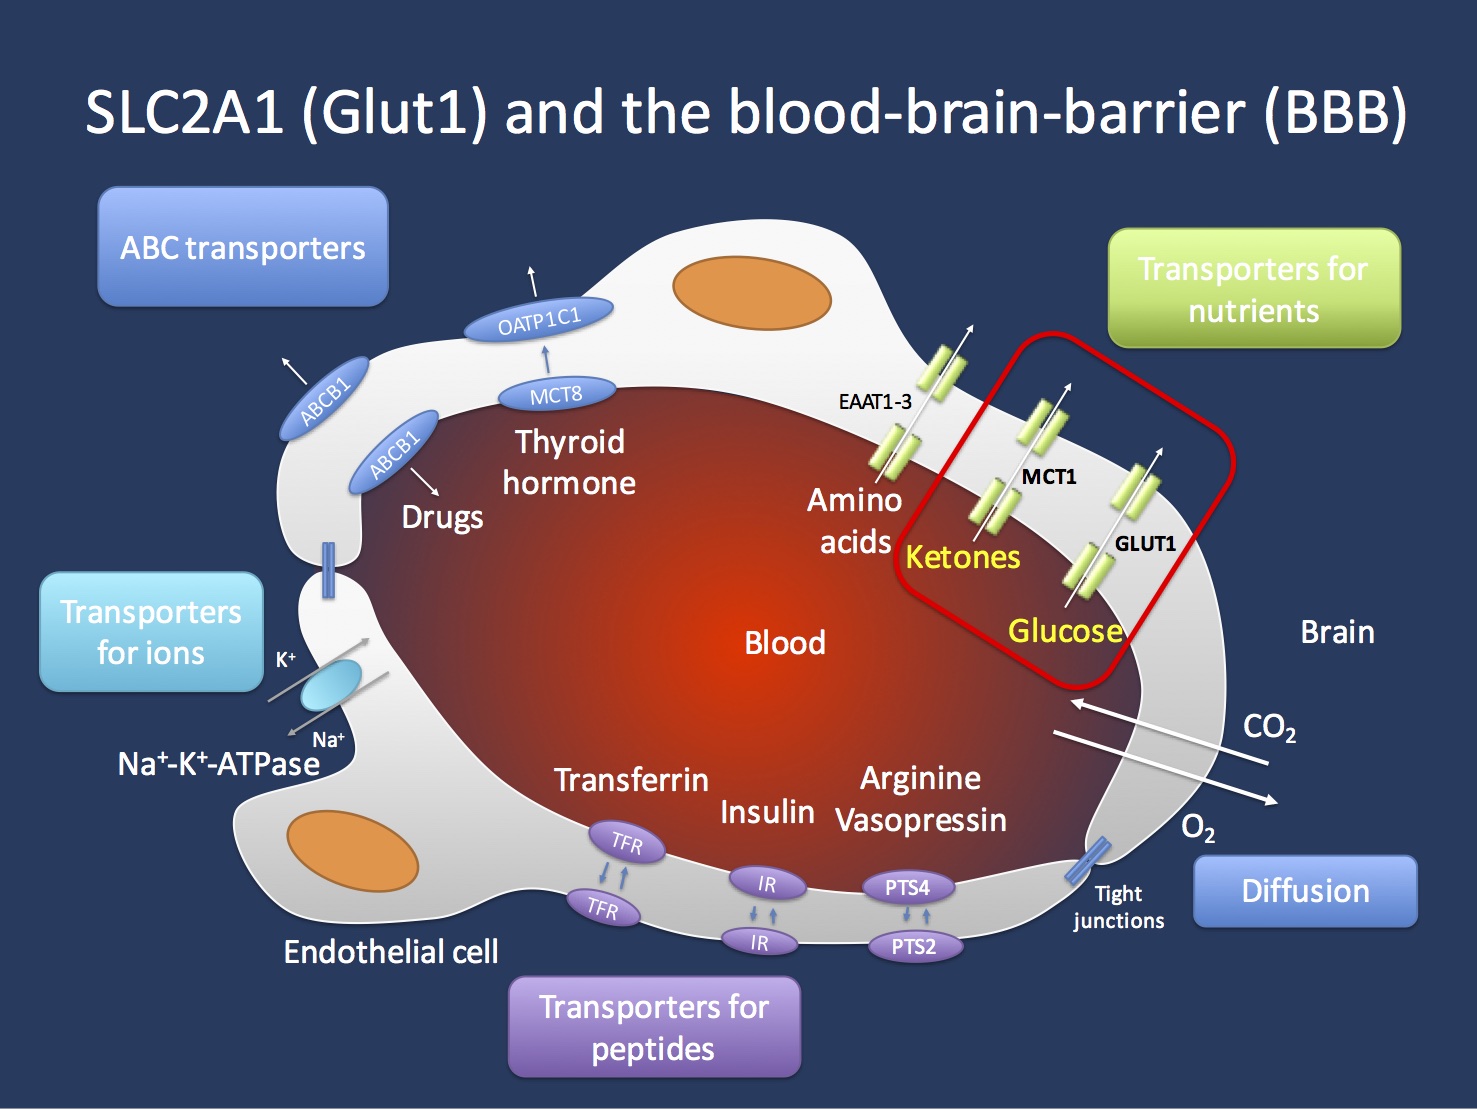 Transport across the blood brain barrier (BBB). The endothelial cells in the Central Nervous System are important gatekeepers of transport into the CNS. The GLUT1 transporter encoded by the SCL2A1 gene is the main transporter for glucose and mutations in the SLC2A1 gene lead to GLUT1 Deficiency Syndrome. This condition can be treated with the ketogenic diet that allows the brain to primarily use ketones as an alternate source of energy. Ketones are primarily transported through the MCT1 transporter, which is encoded by the SLC16A1 gene. Figure inspired by Zlokovic, Nature Reviews Neuroscience 12, 723-738 (December 2011). 